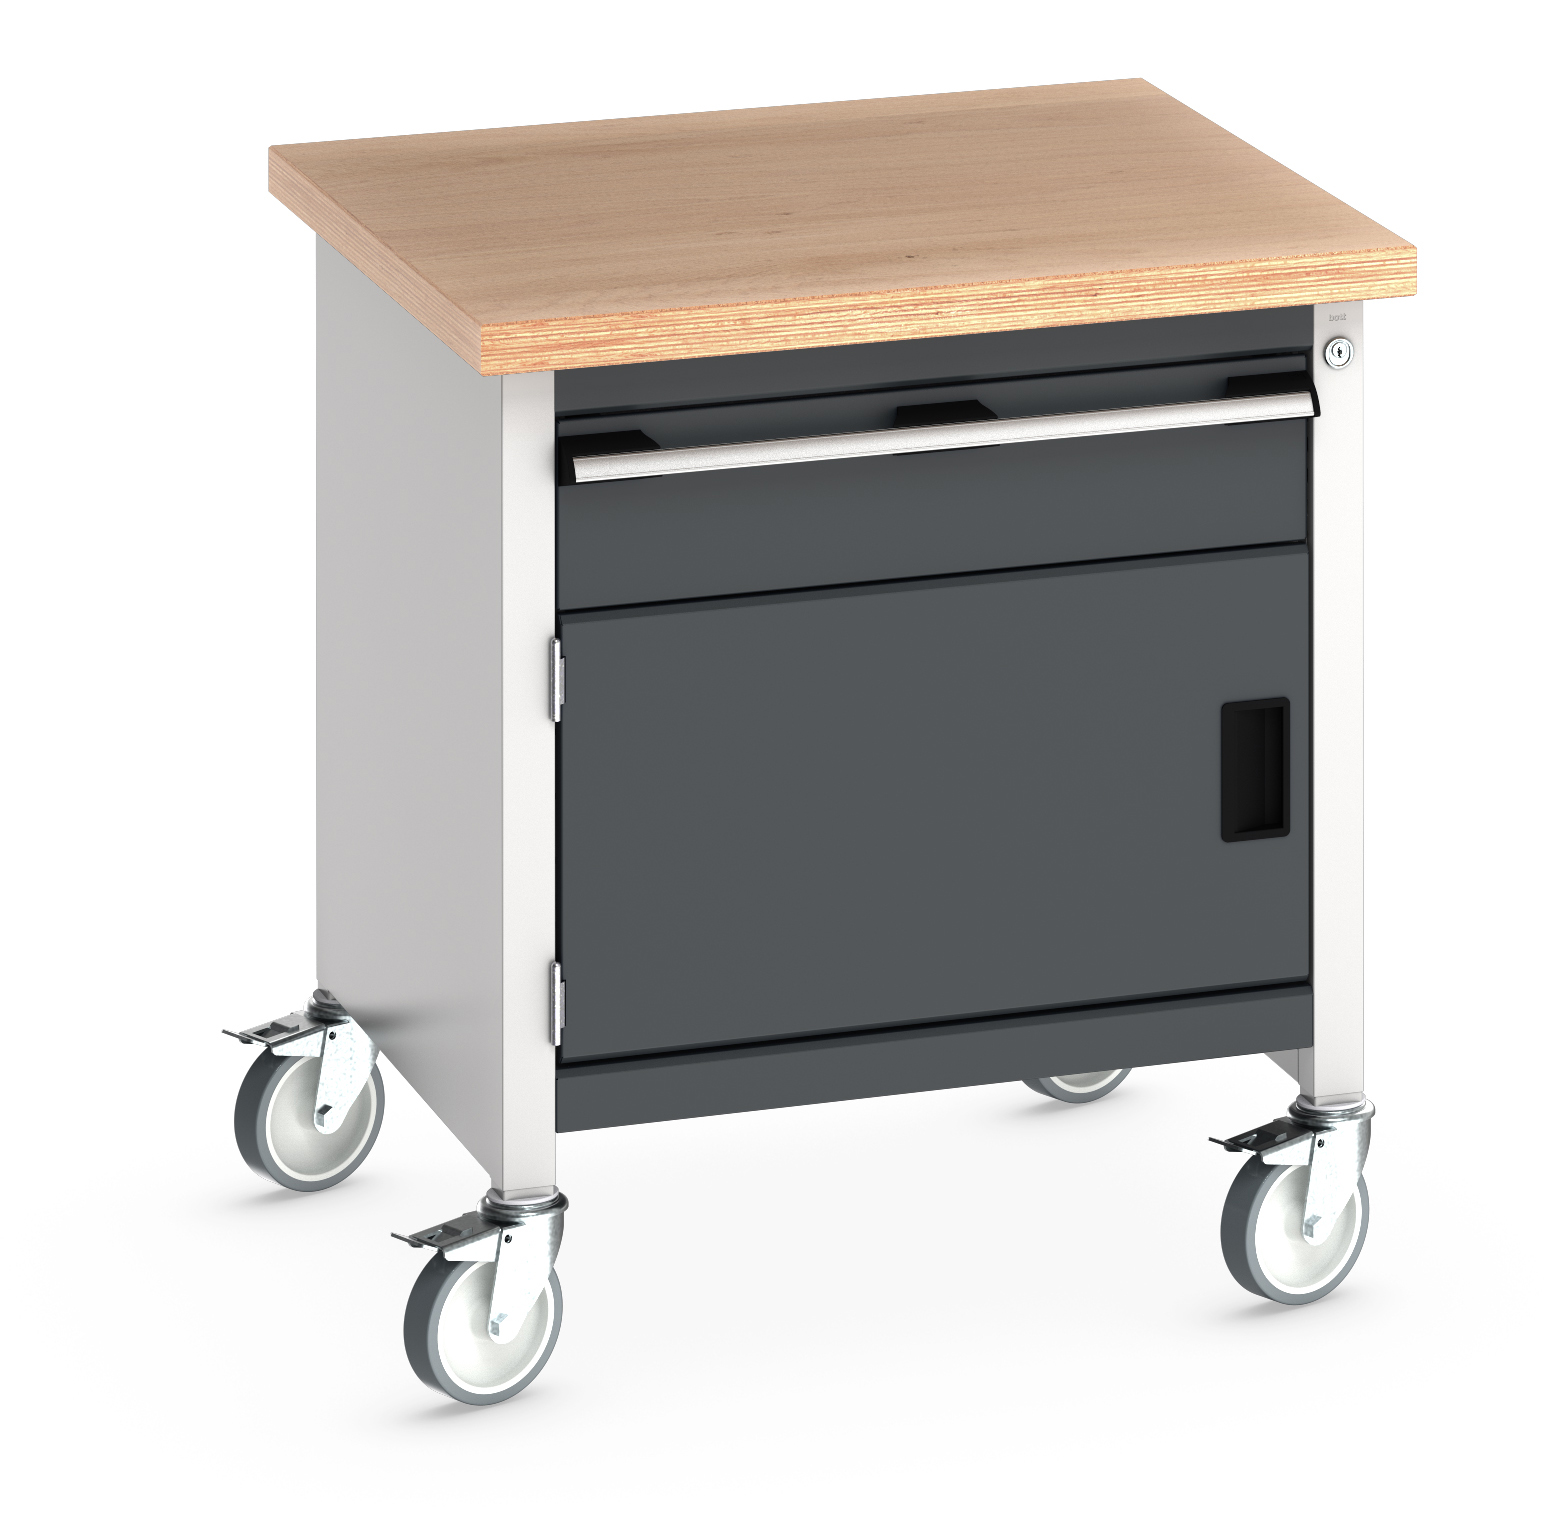 Bott Cubio Mobile Storage Bench With 1 Drawer - Full Cupboard - 41002088.19V